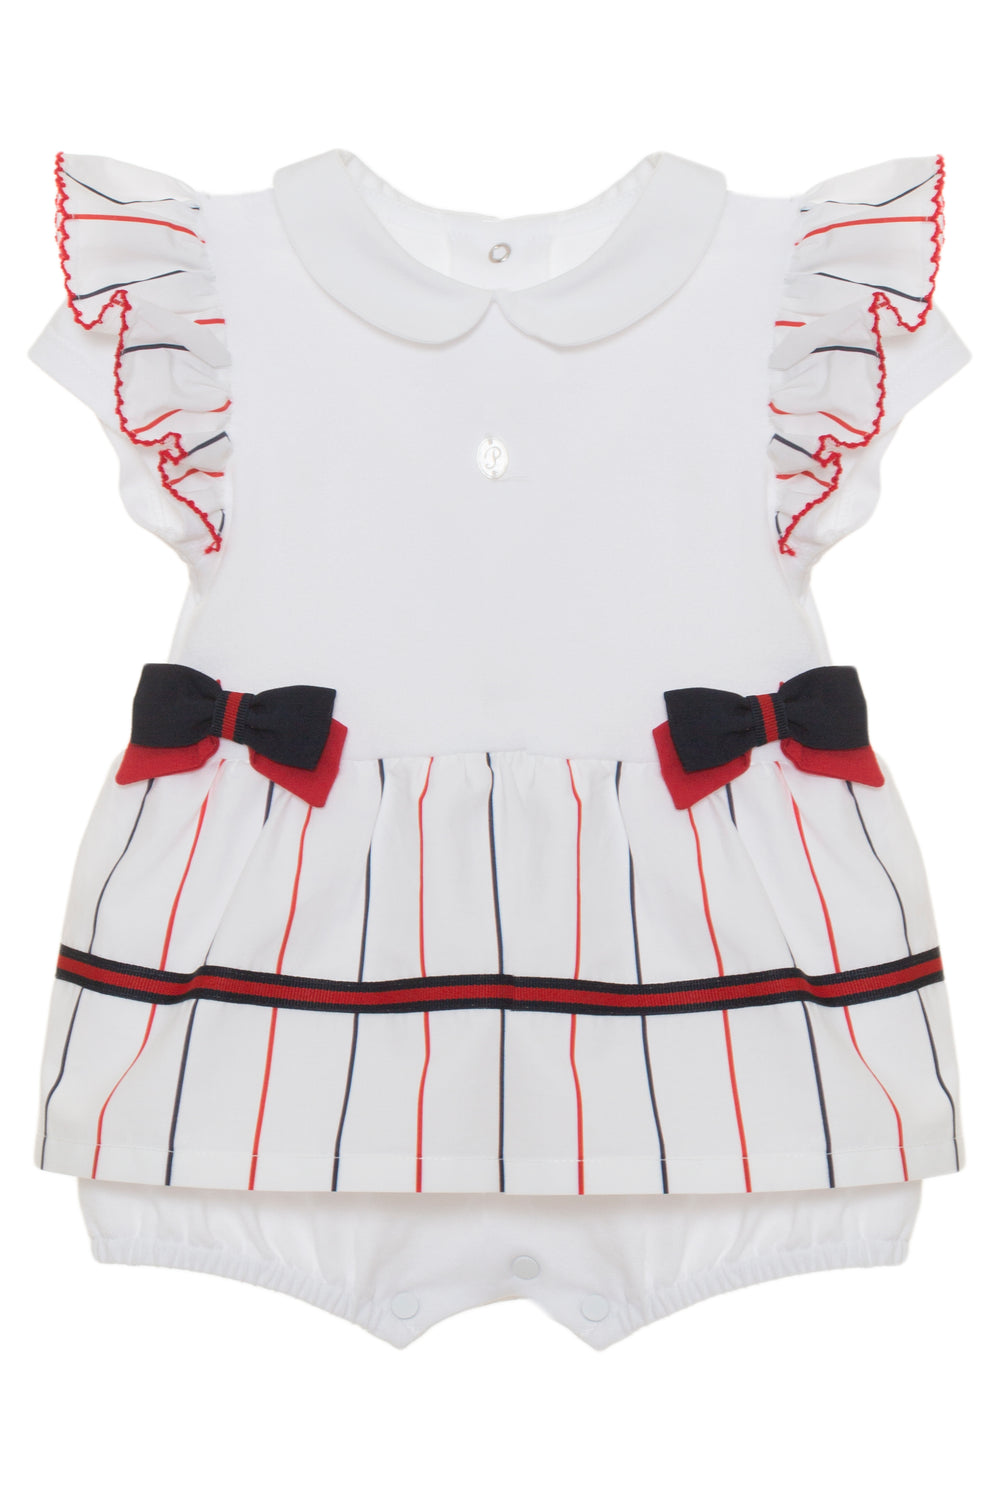 Patachou "Maisy" Red & Navy Striped Romper | iphoneandroidapplications